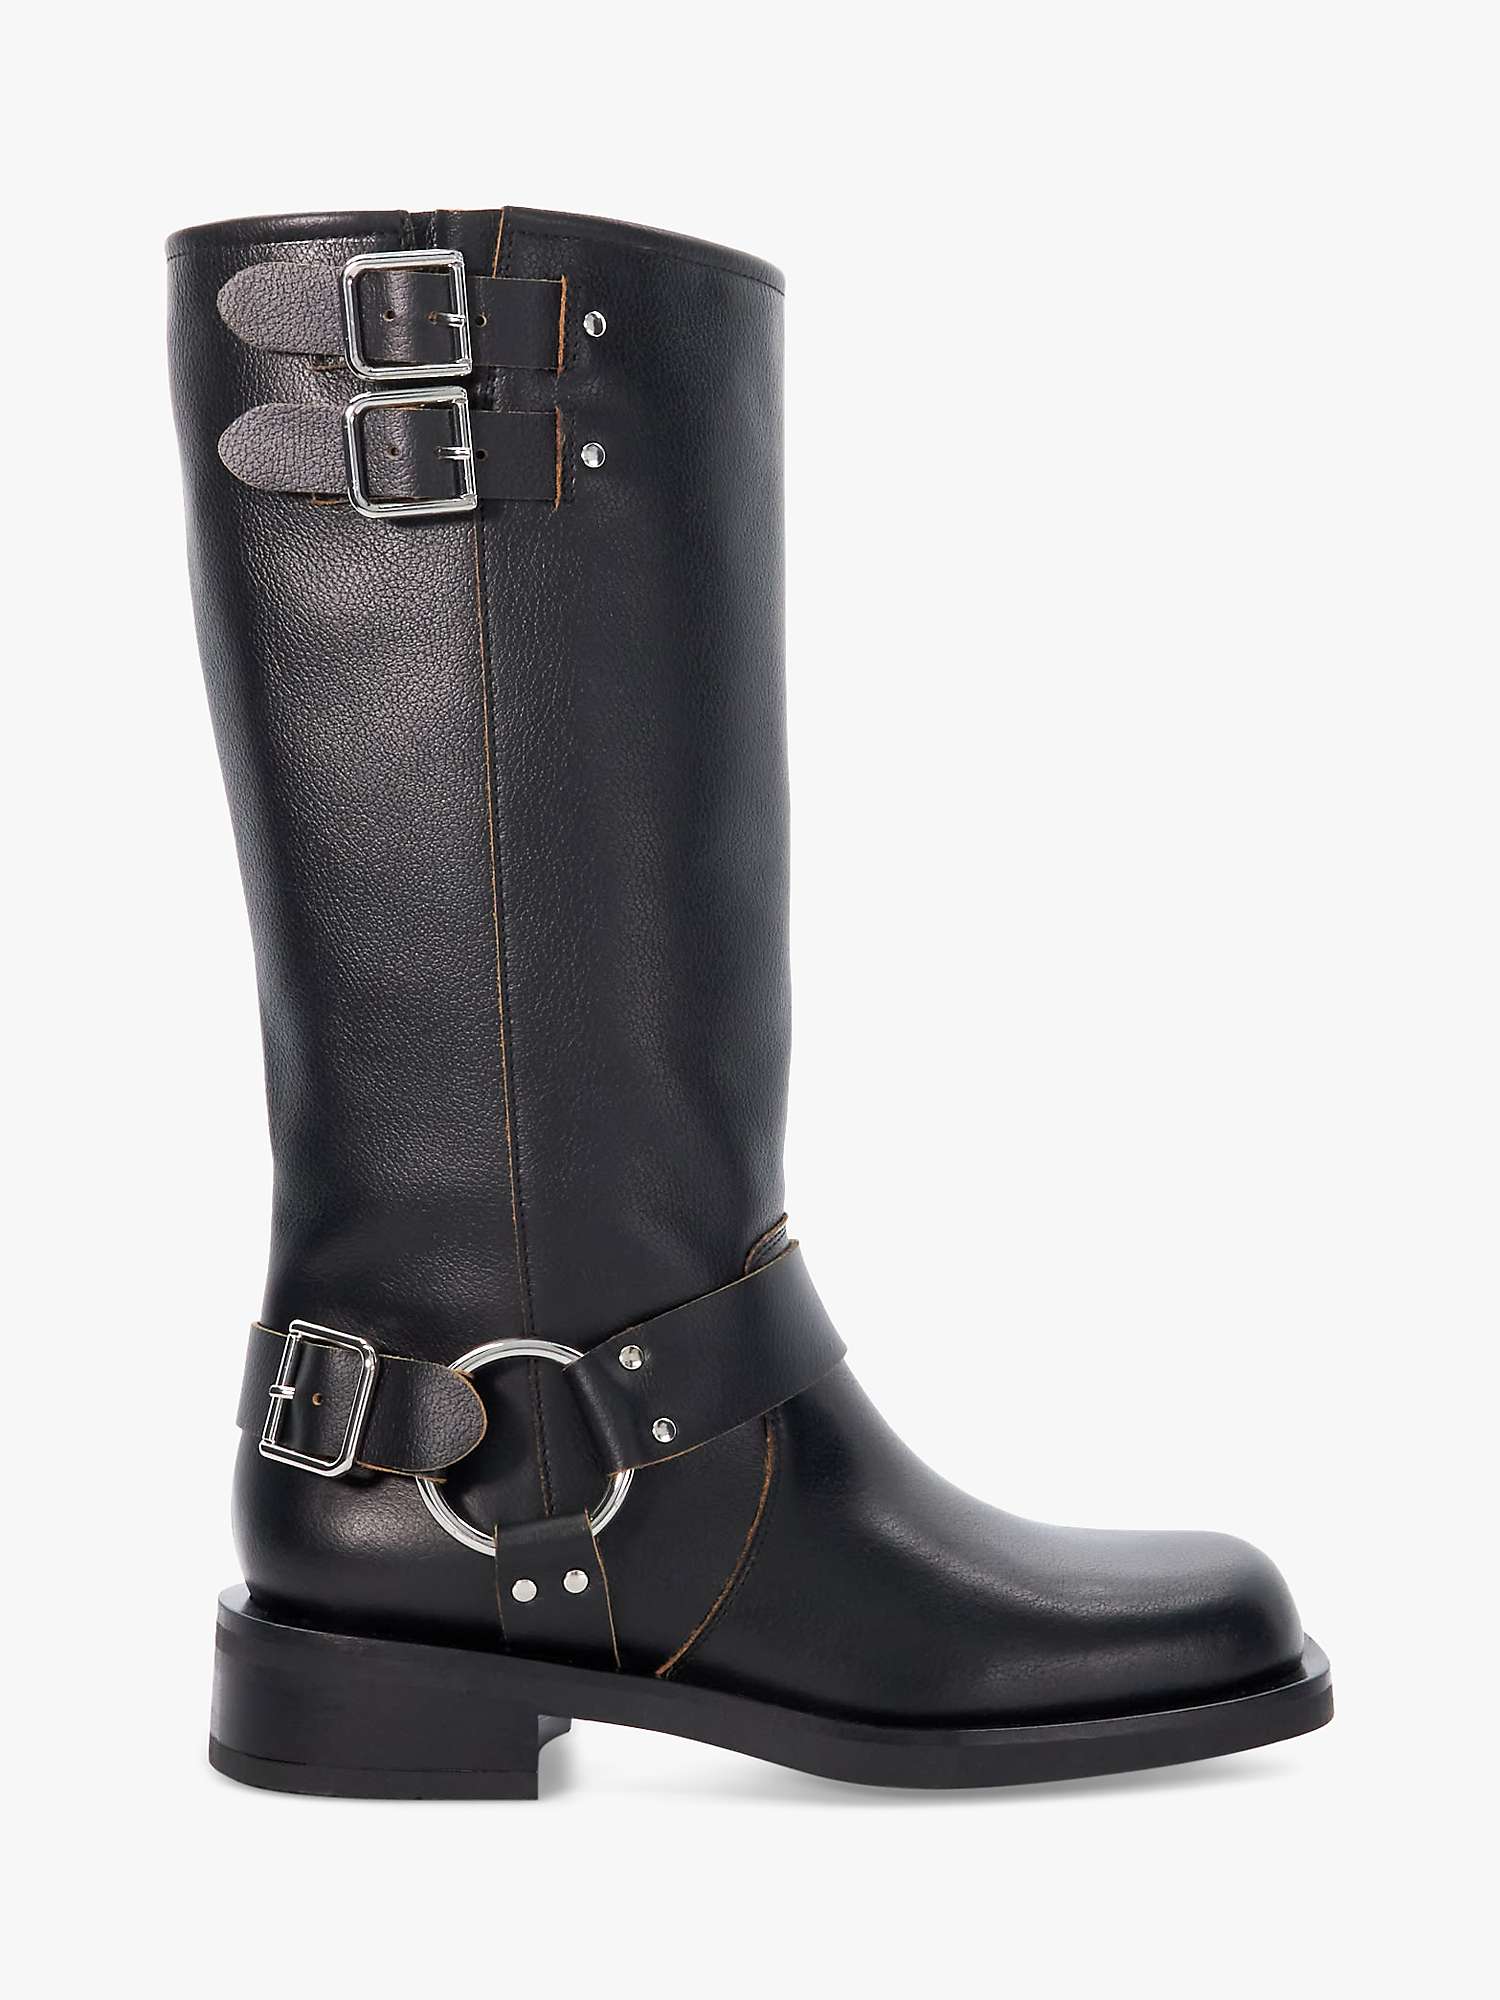 Buy Dune Totoe Leather Buckle Detail Ankle Boots, Black Online at johnlewis.com